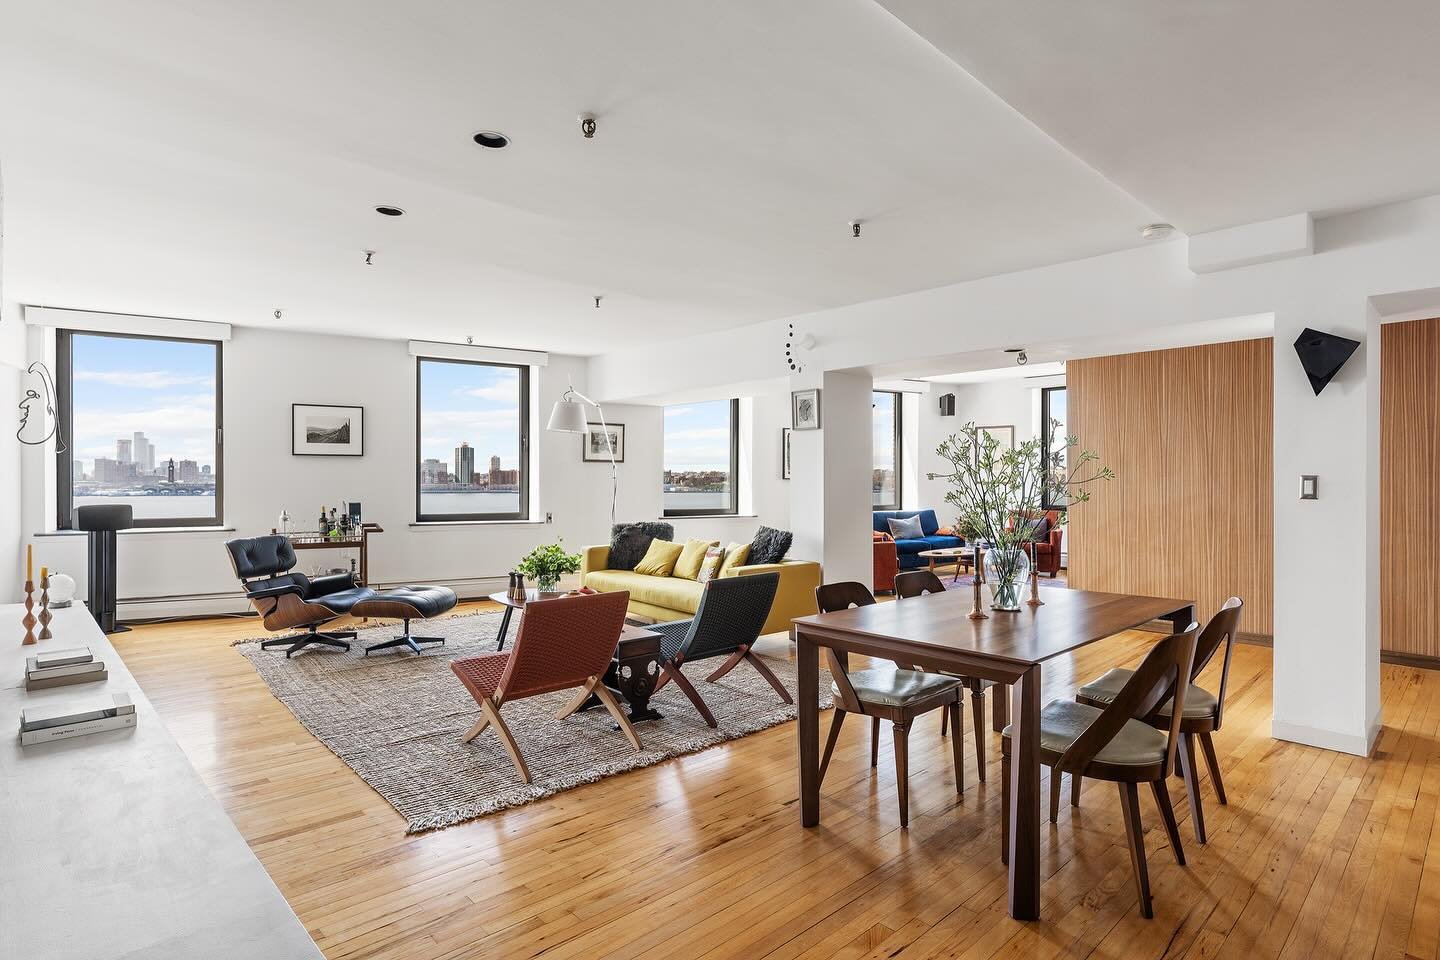 Just Listed // This classic corner loft with spectacular river and skyline views is a rare-to-find gem in one of the most prime locations in the West Village // $3,495,000